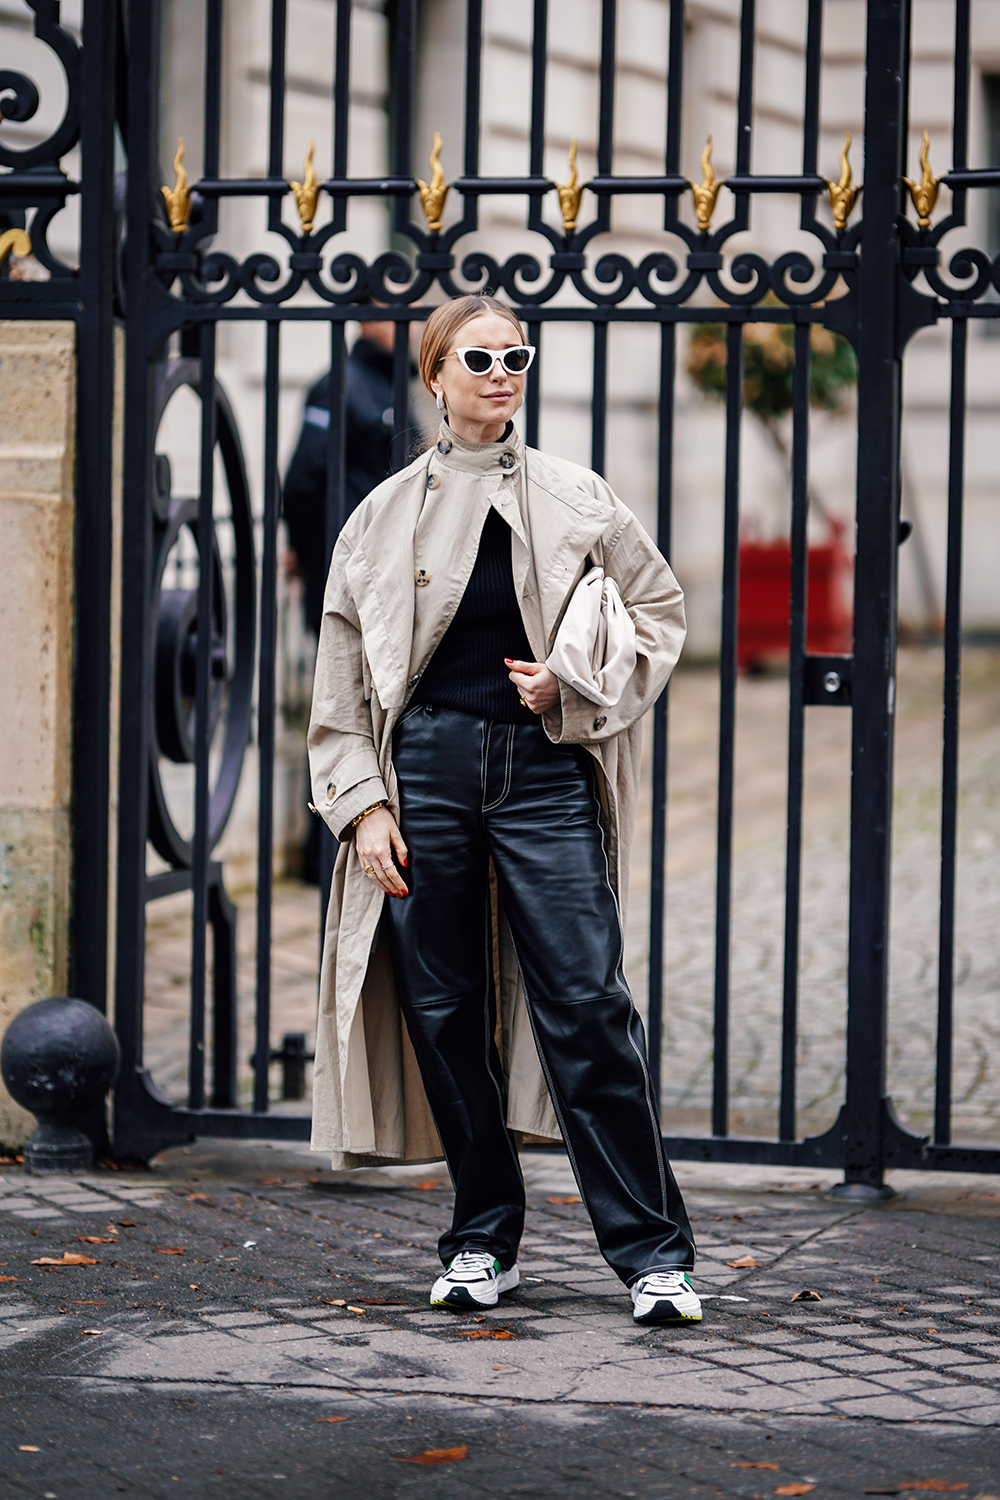 PARIS, FRANCE - MARCH 02: Pernille Teisbaek wears earrings, white sunglasses, a beige trench coat, black leather pants, white sneakers, a beige bag, outside Altuzarra, during Paris Fashion Week Womenswear Fall/Winter 2019/2020, on March 02, 2019 in Paris, France. (Photo by Edward Berthelot/Getty Images)